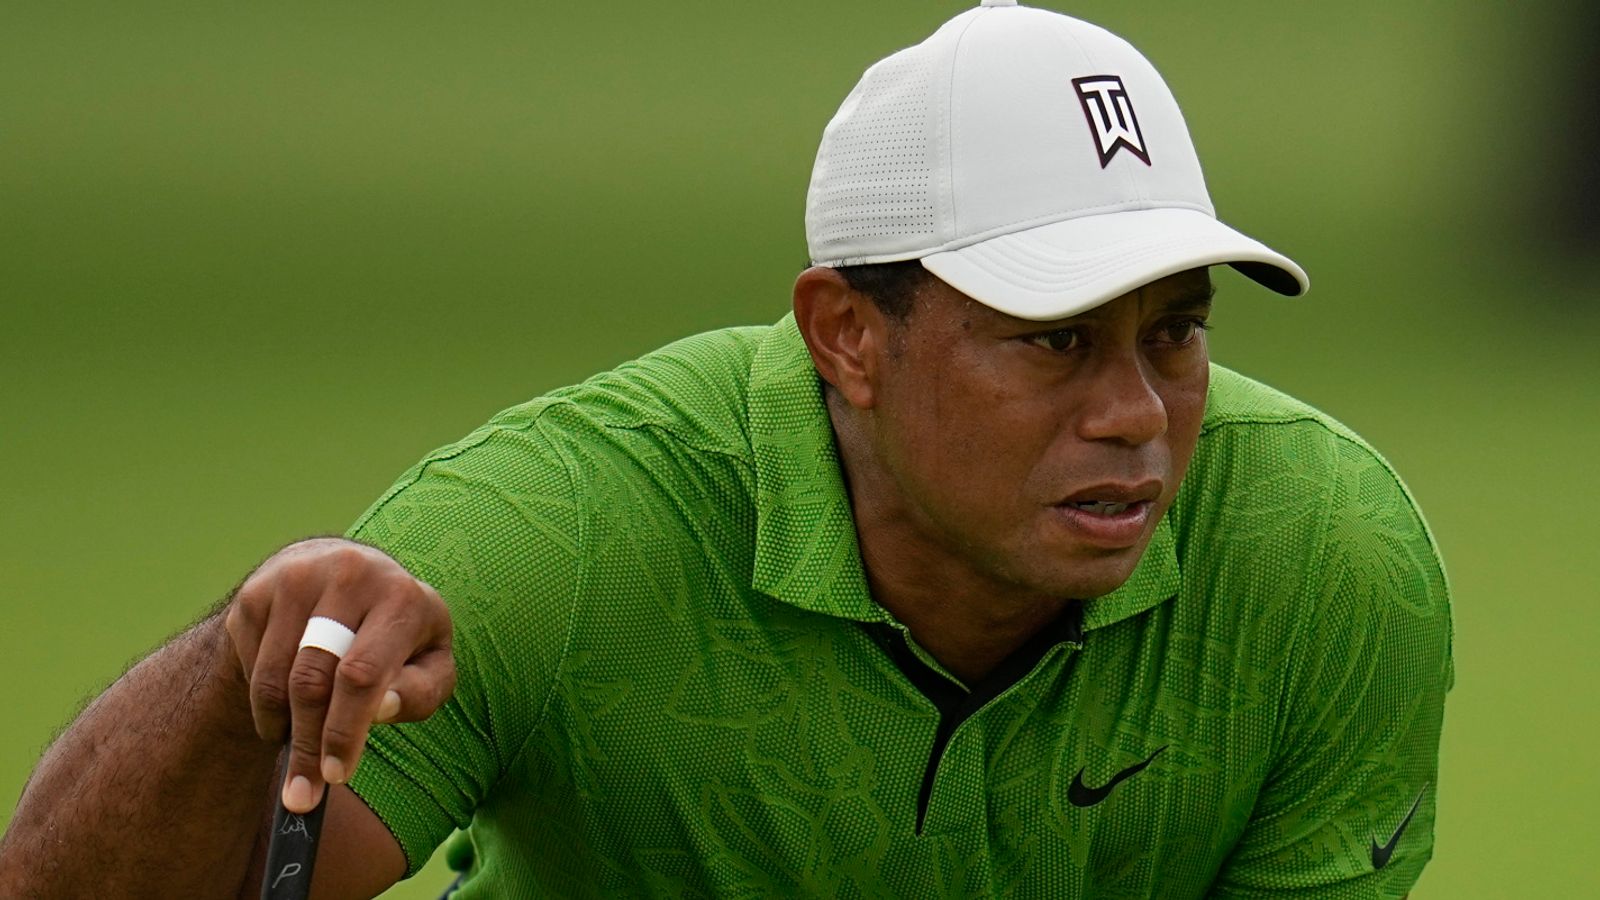 The 150th Open: Tiger Woods grouped with Matt Fitzpatrick; Rory McIlroy alongside Collin Morikawa